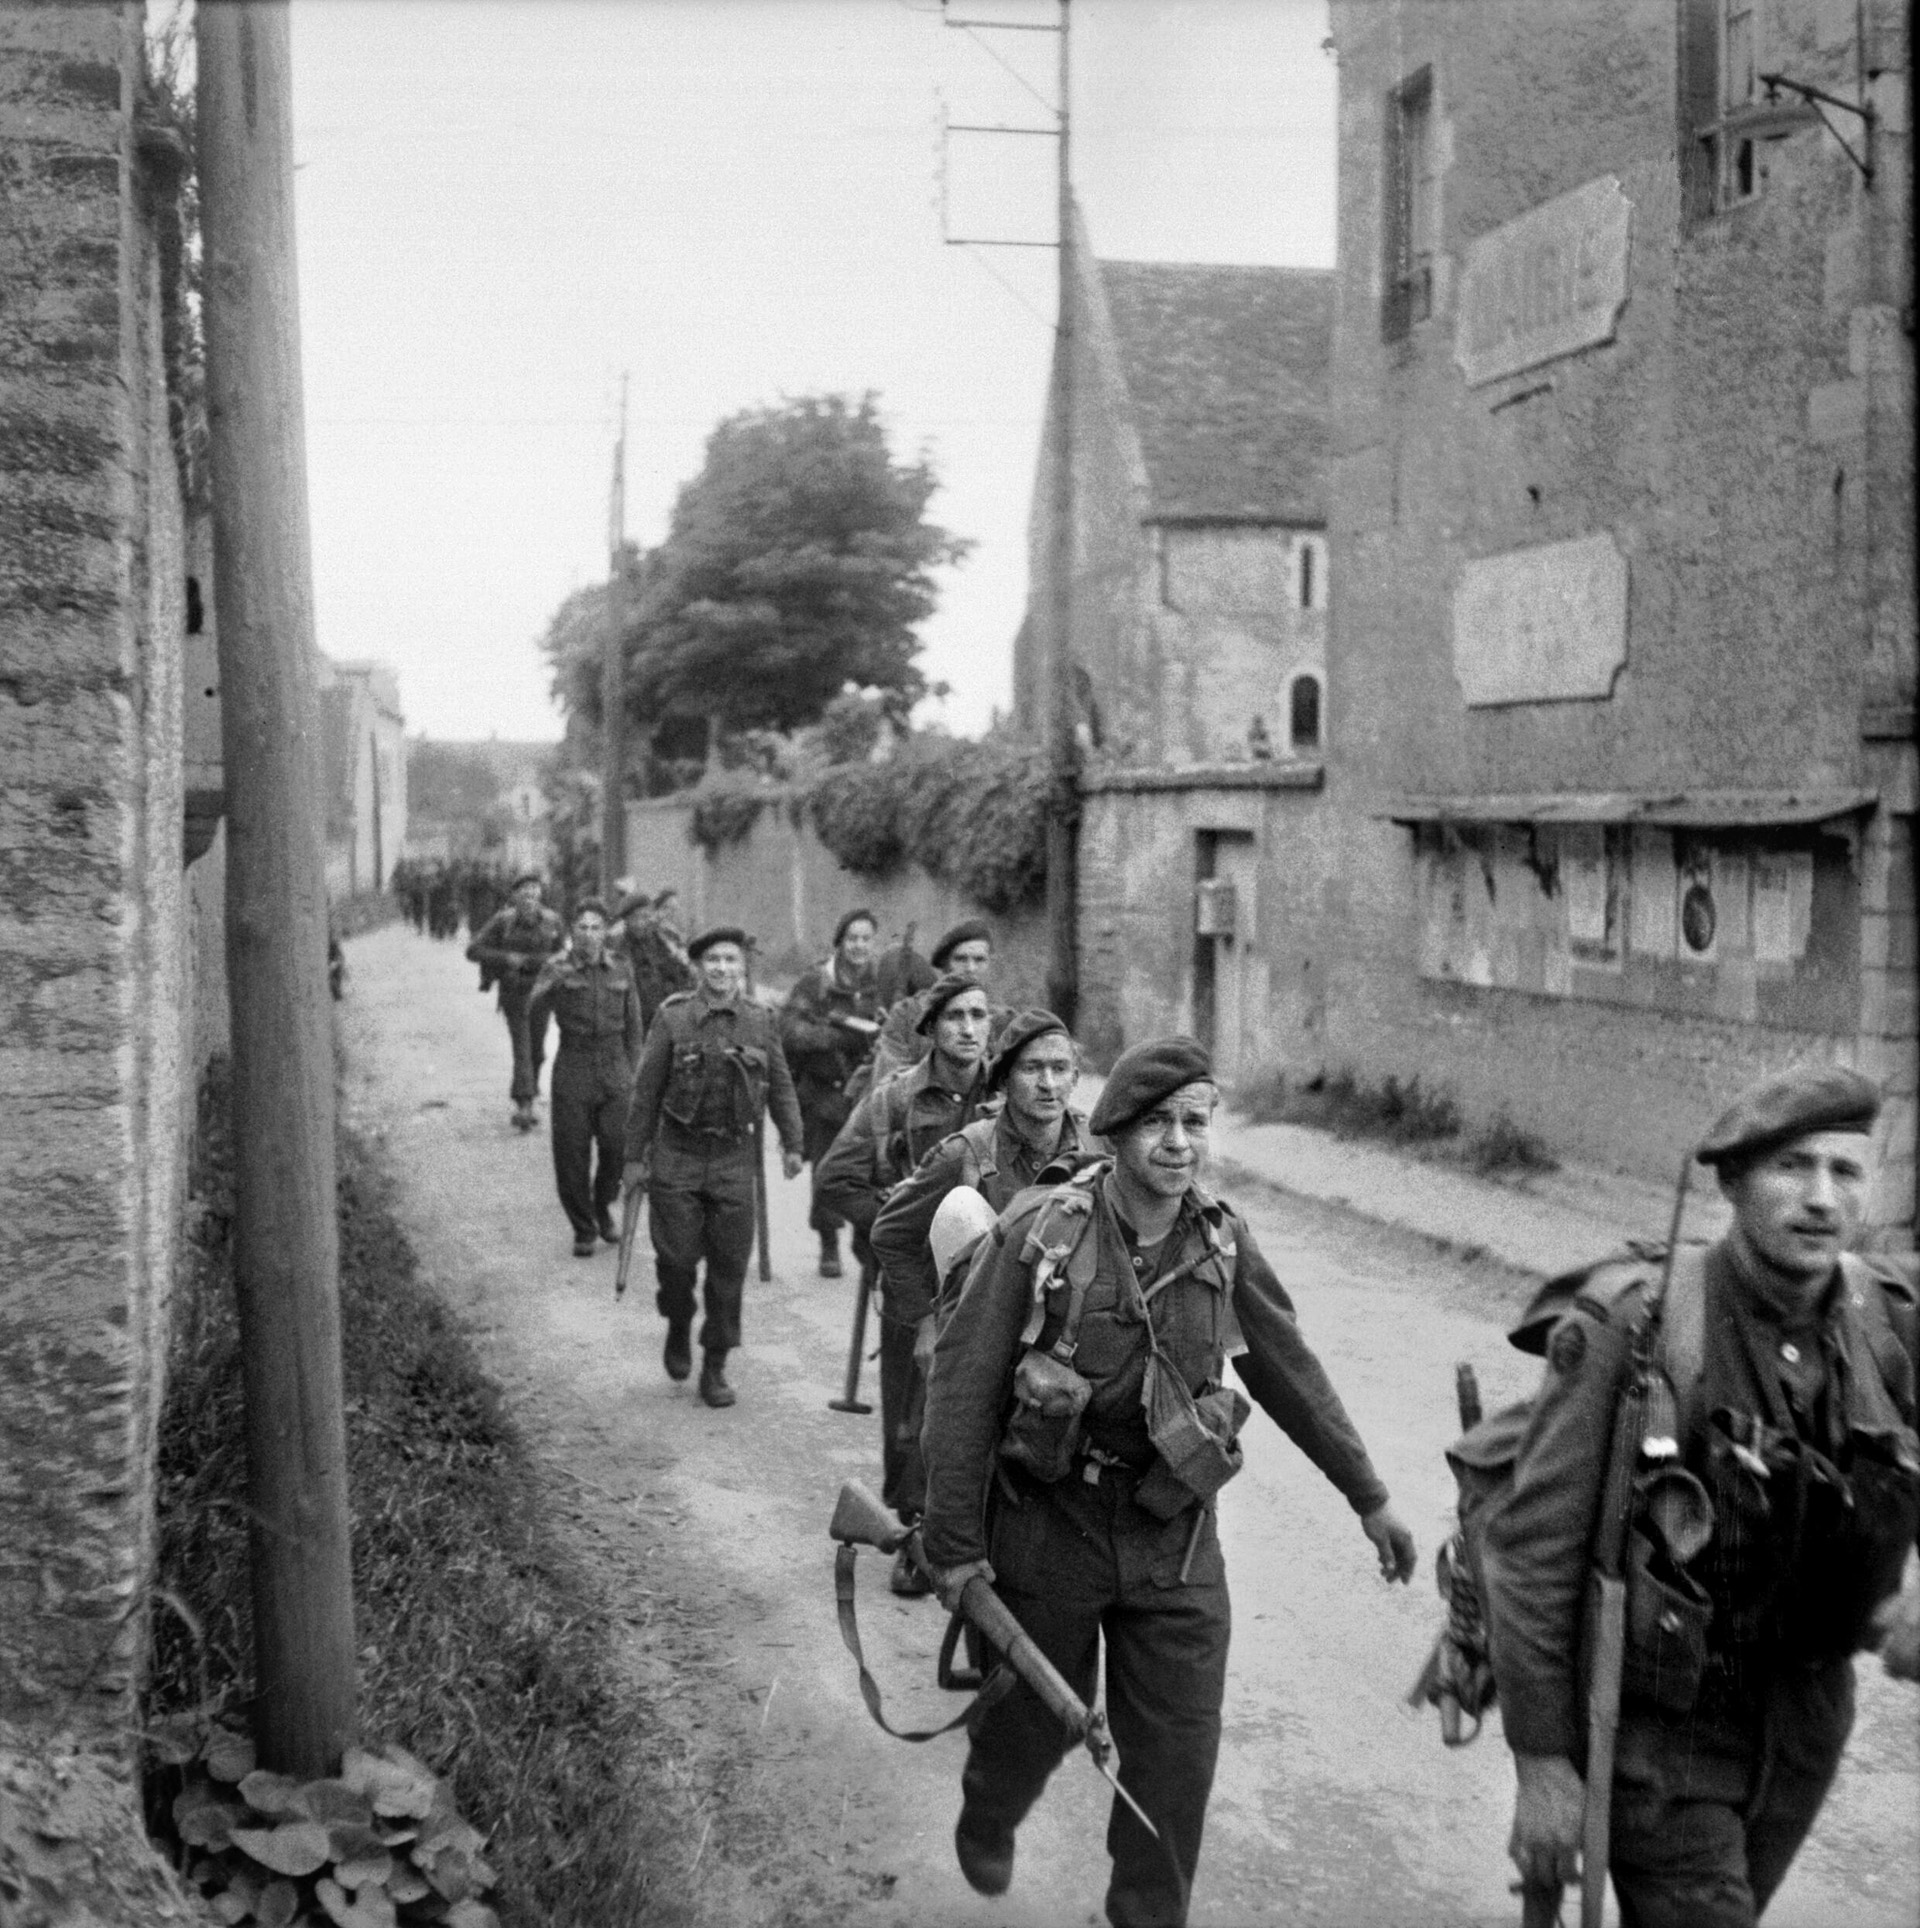 Eschewing steel helmets for berets, a group of British Commandos who have just landed at Juno Beach on D-Day, June 6, 1944, heads past the city hall (“Mairie”) of a deserted French town. Correspondent John Steinbeck considered the Commandos “very strange men.”